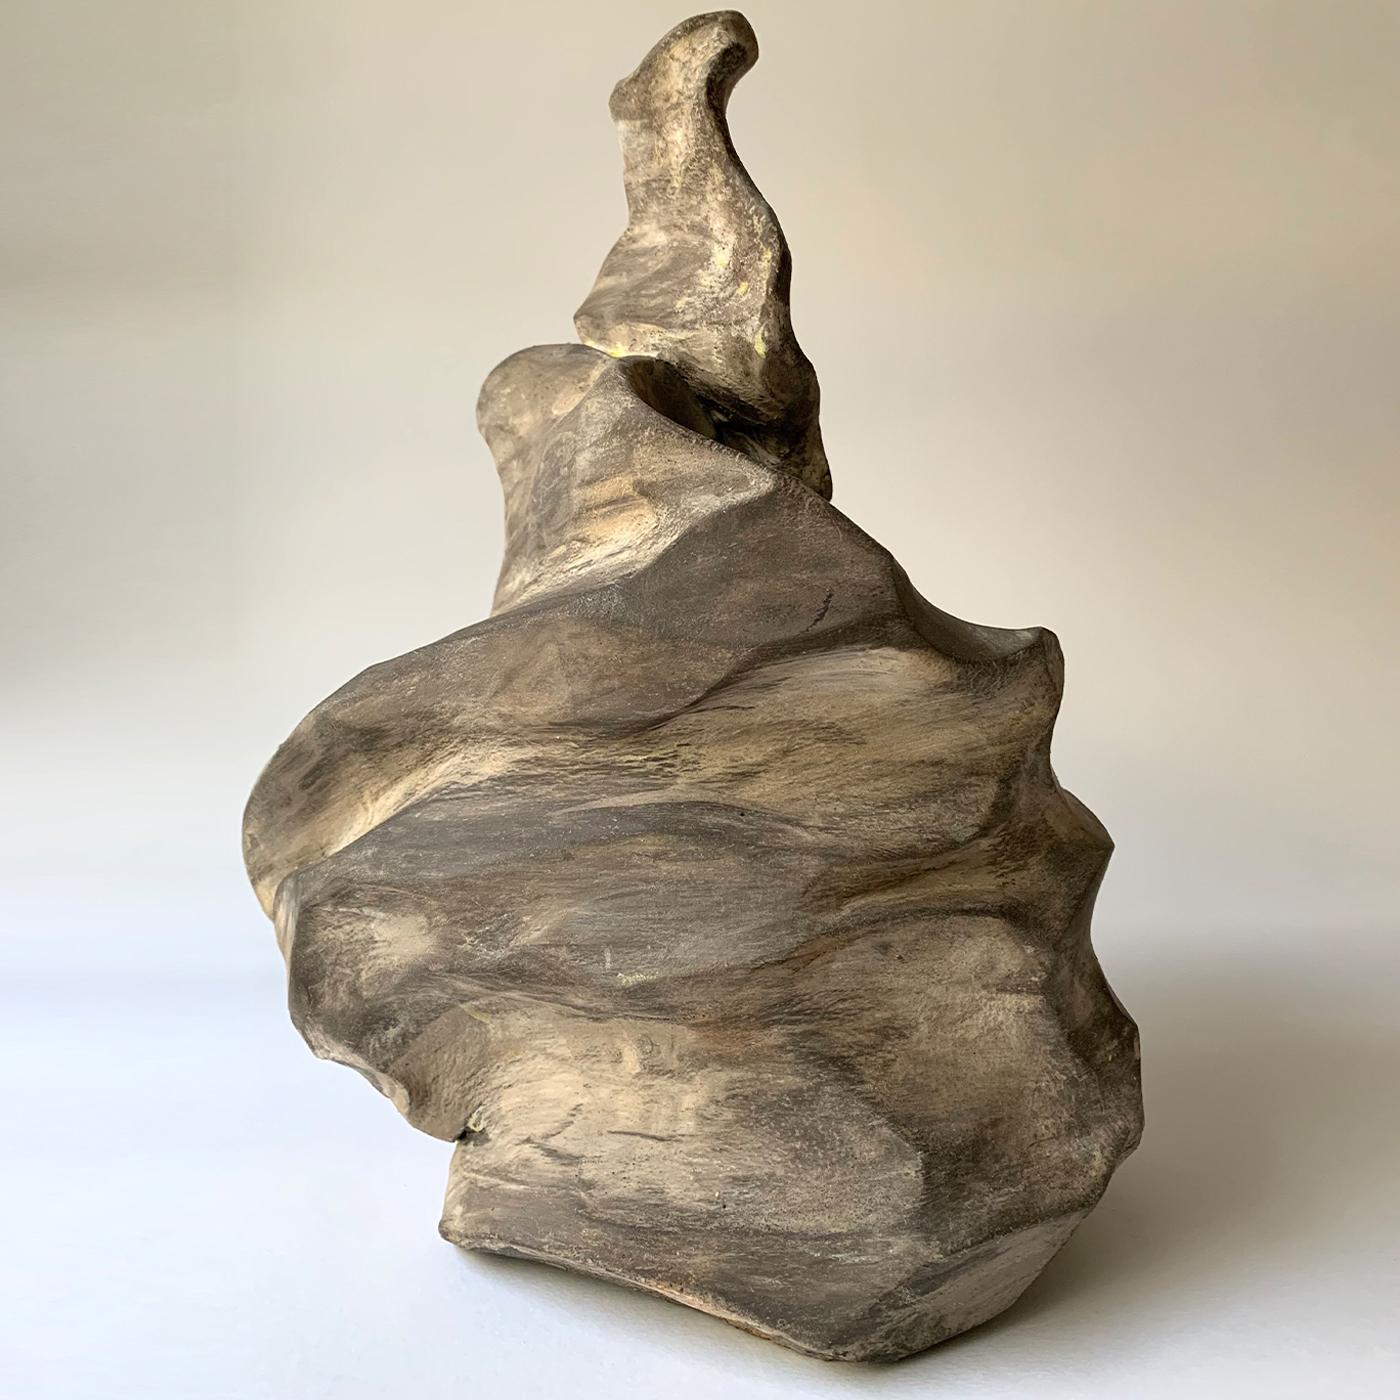 The astonishing Gaia Sculpture is a unique work of art by Silvia Garau who, starting from a single block of clay, worked hard and passionately using spiral-like gestures to obtain this captivating, utterly fascinating shape. Made of black fire-proof